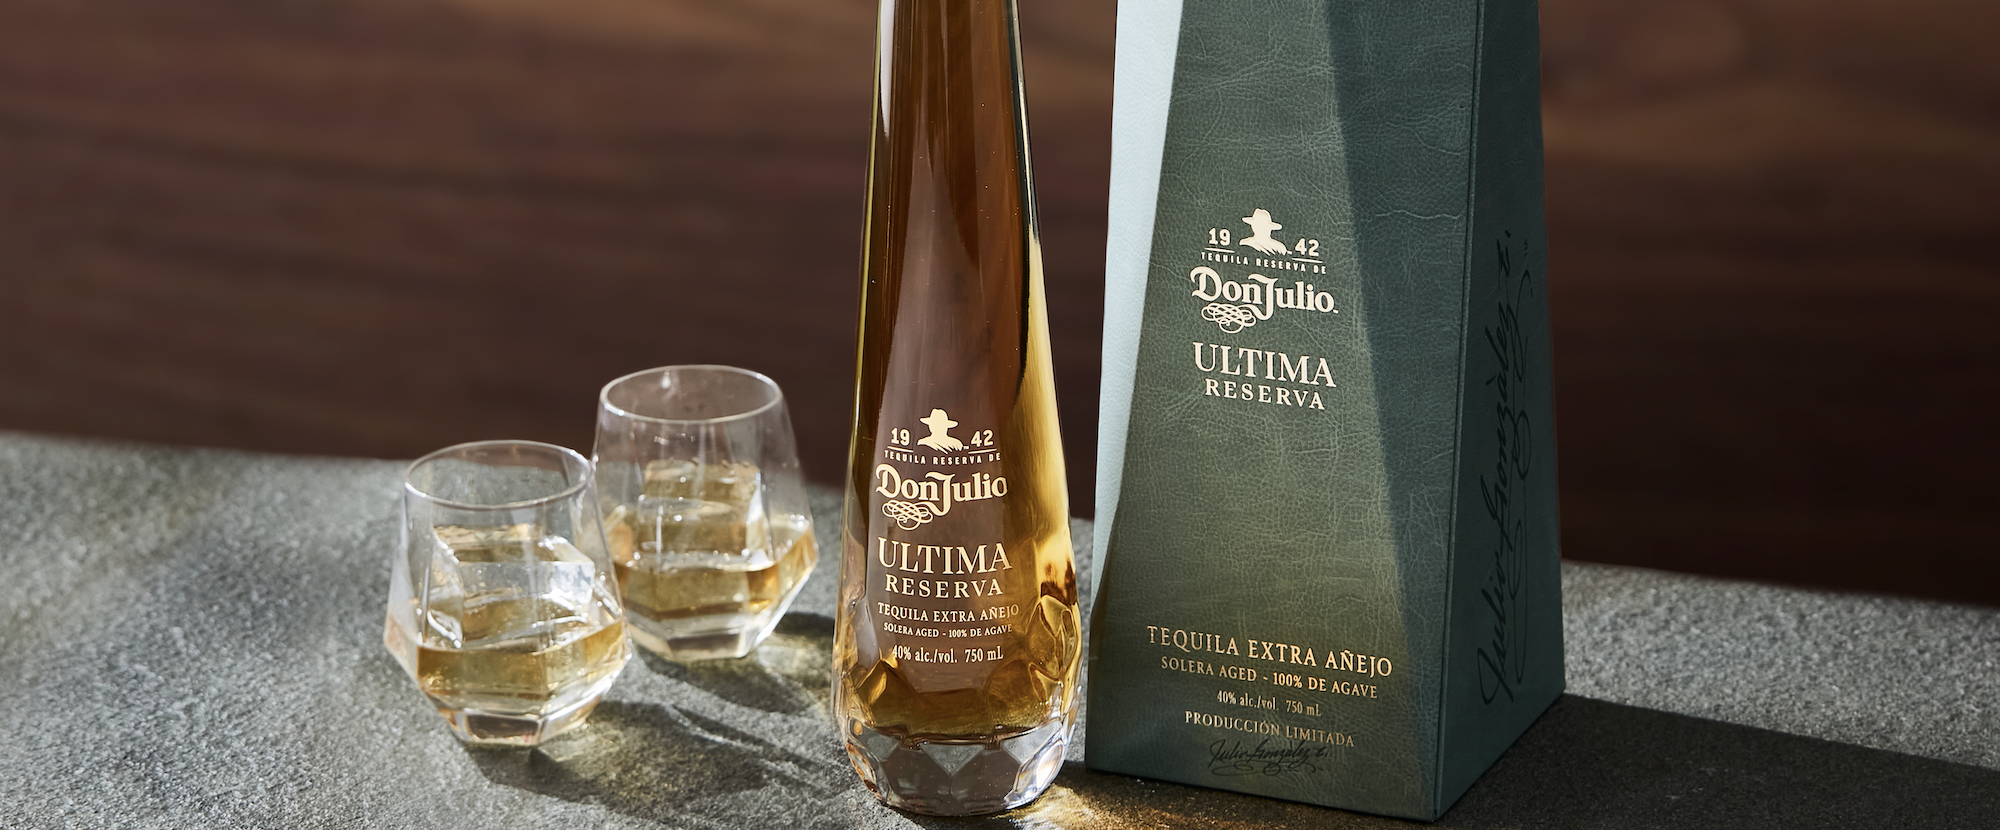 Don Julio Ultima with packaging.